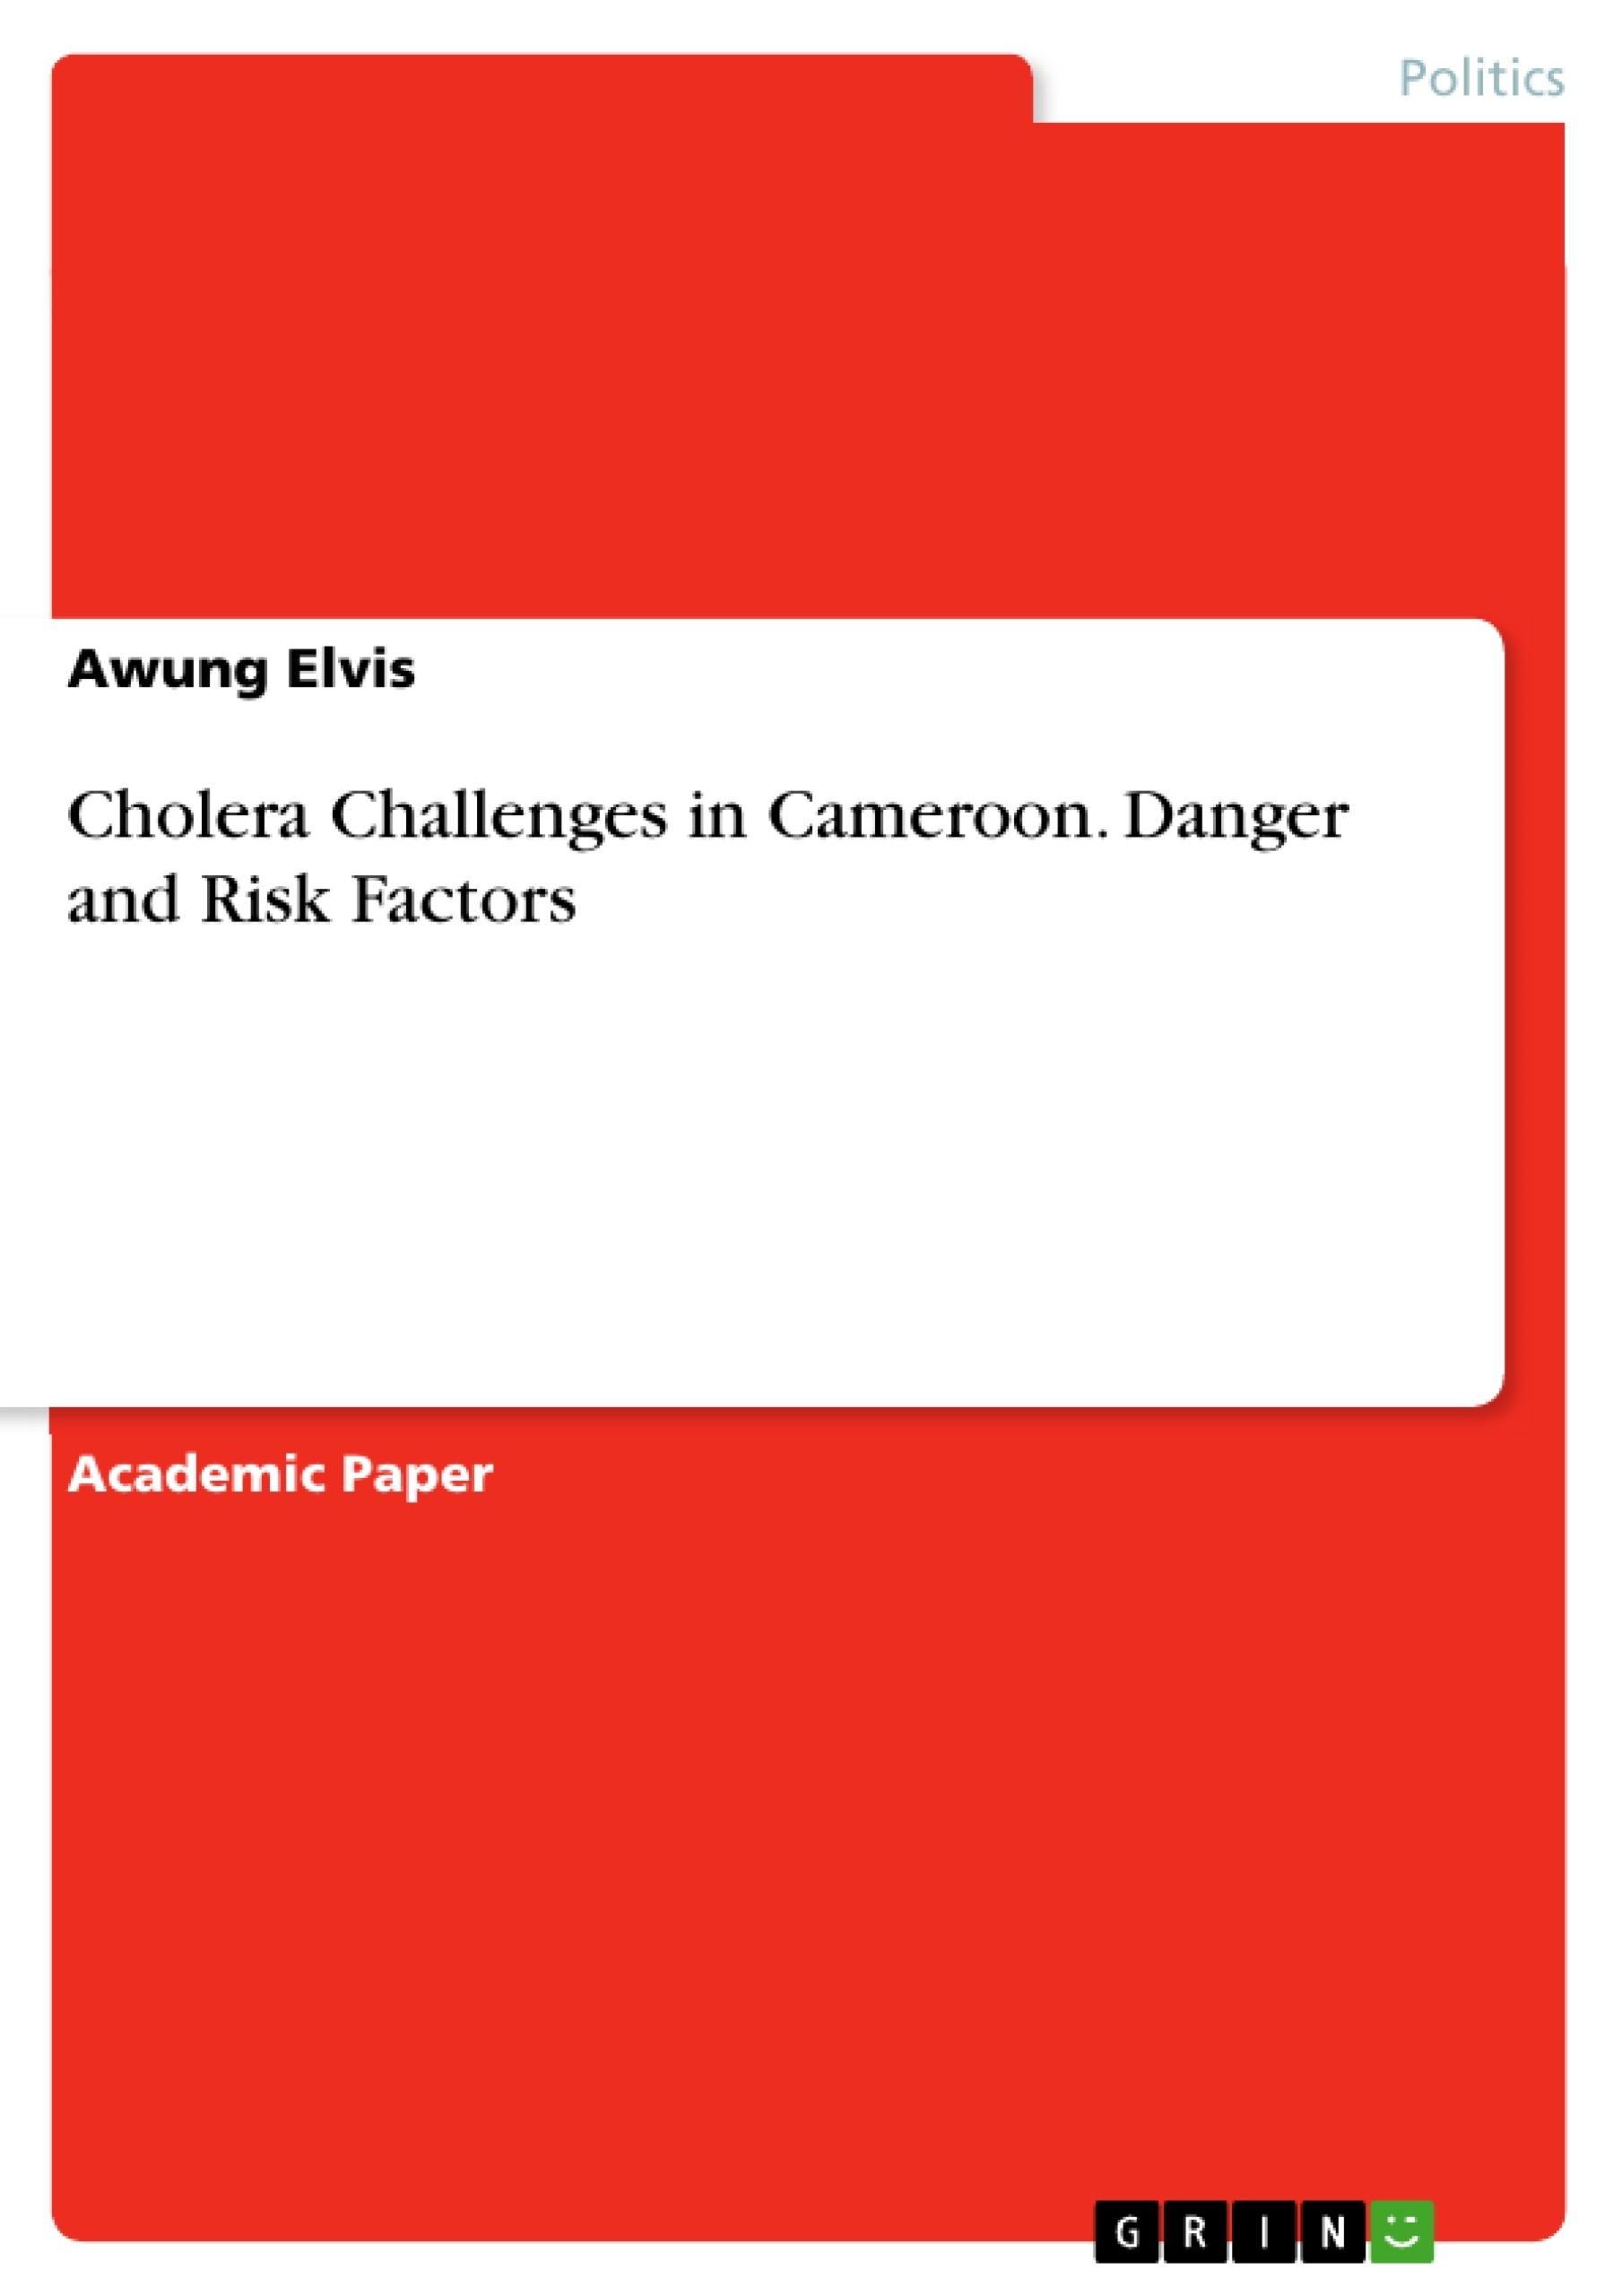 Title: Cholera Challenges in Cameroon. Danger and Risk Factors